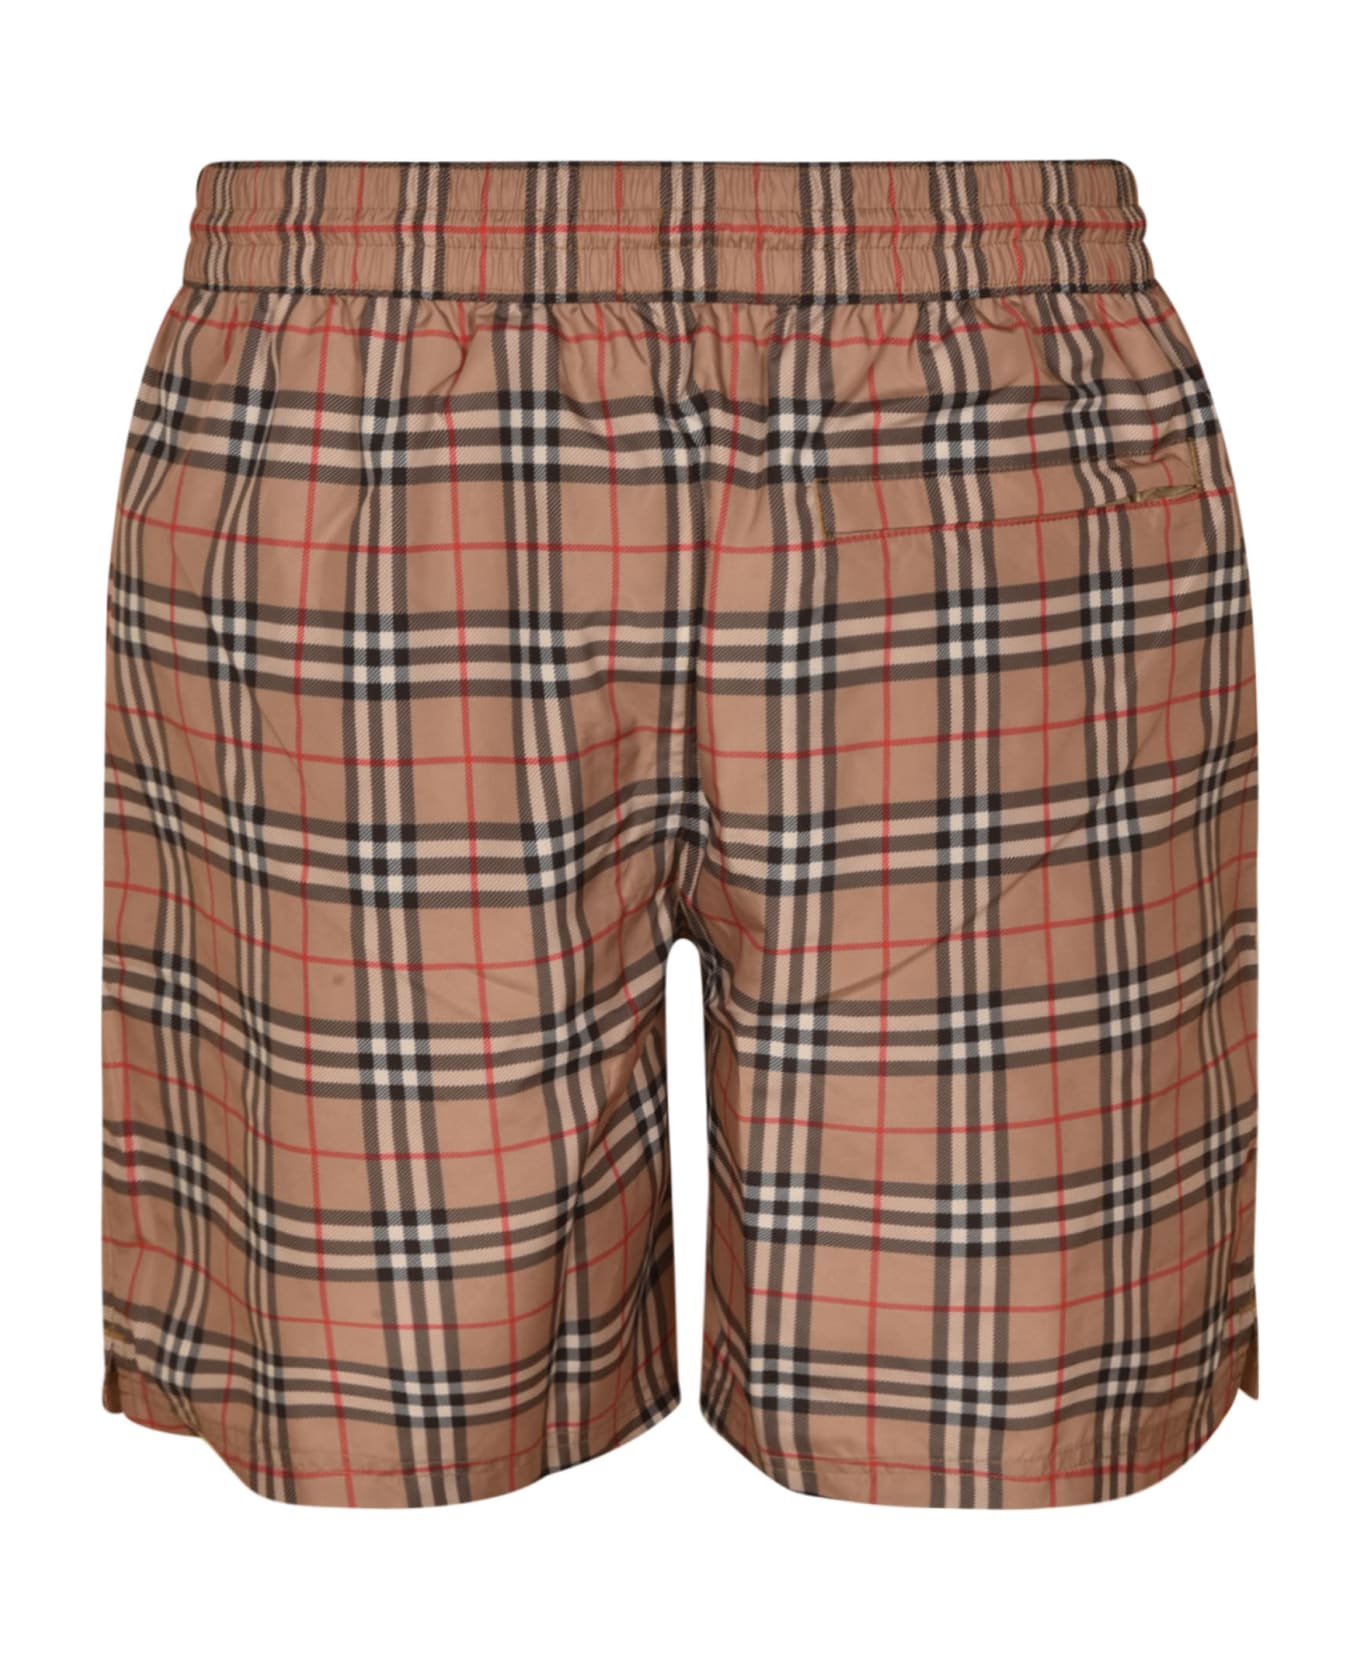 Burberry House Check Drawstring Waist Shorts - Archive Beige Ip Chk